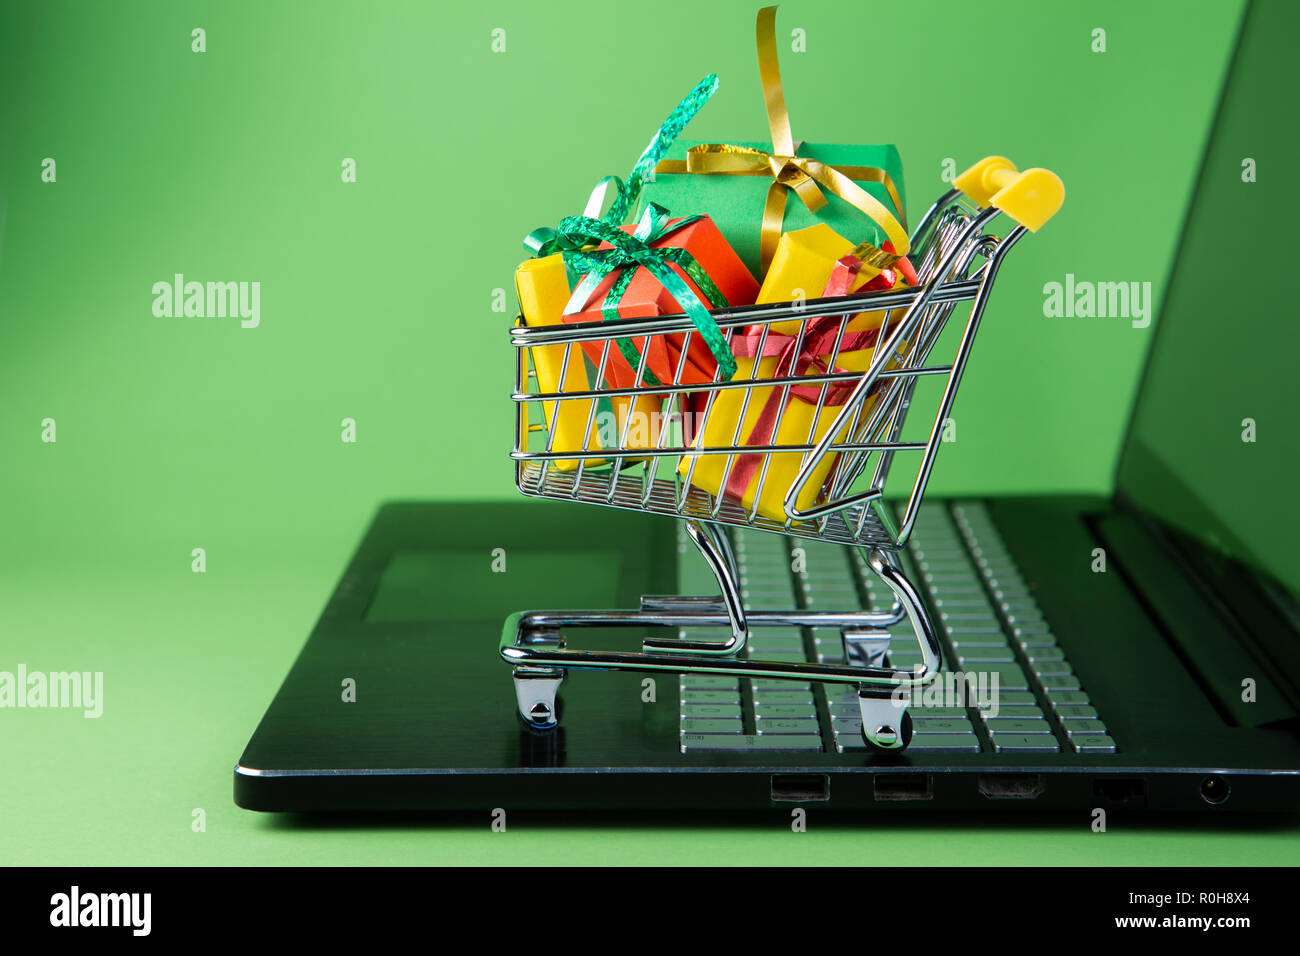 Ciber monday concept - trolley cart with christmas presents on notebook Stock Photo